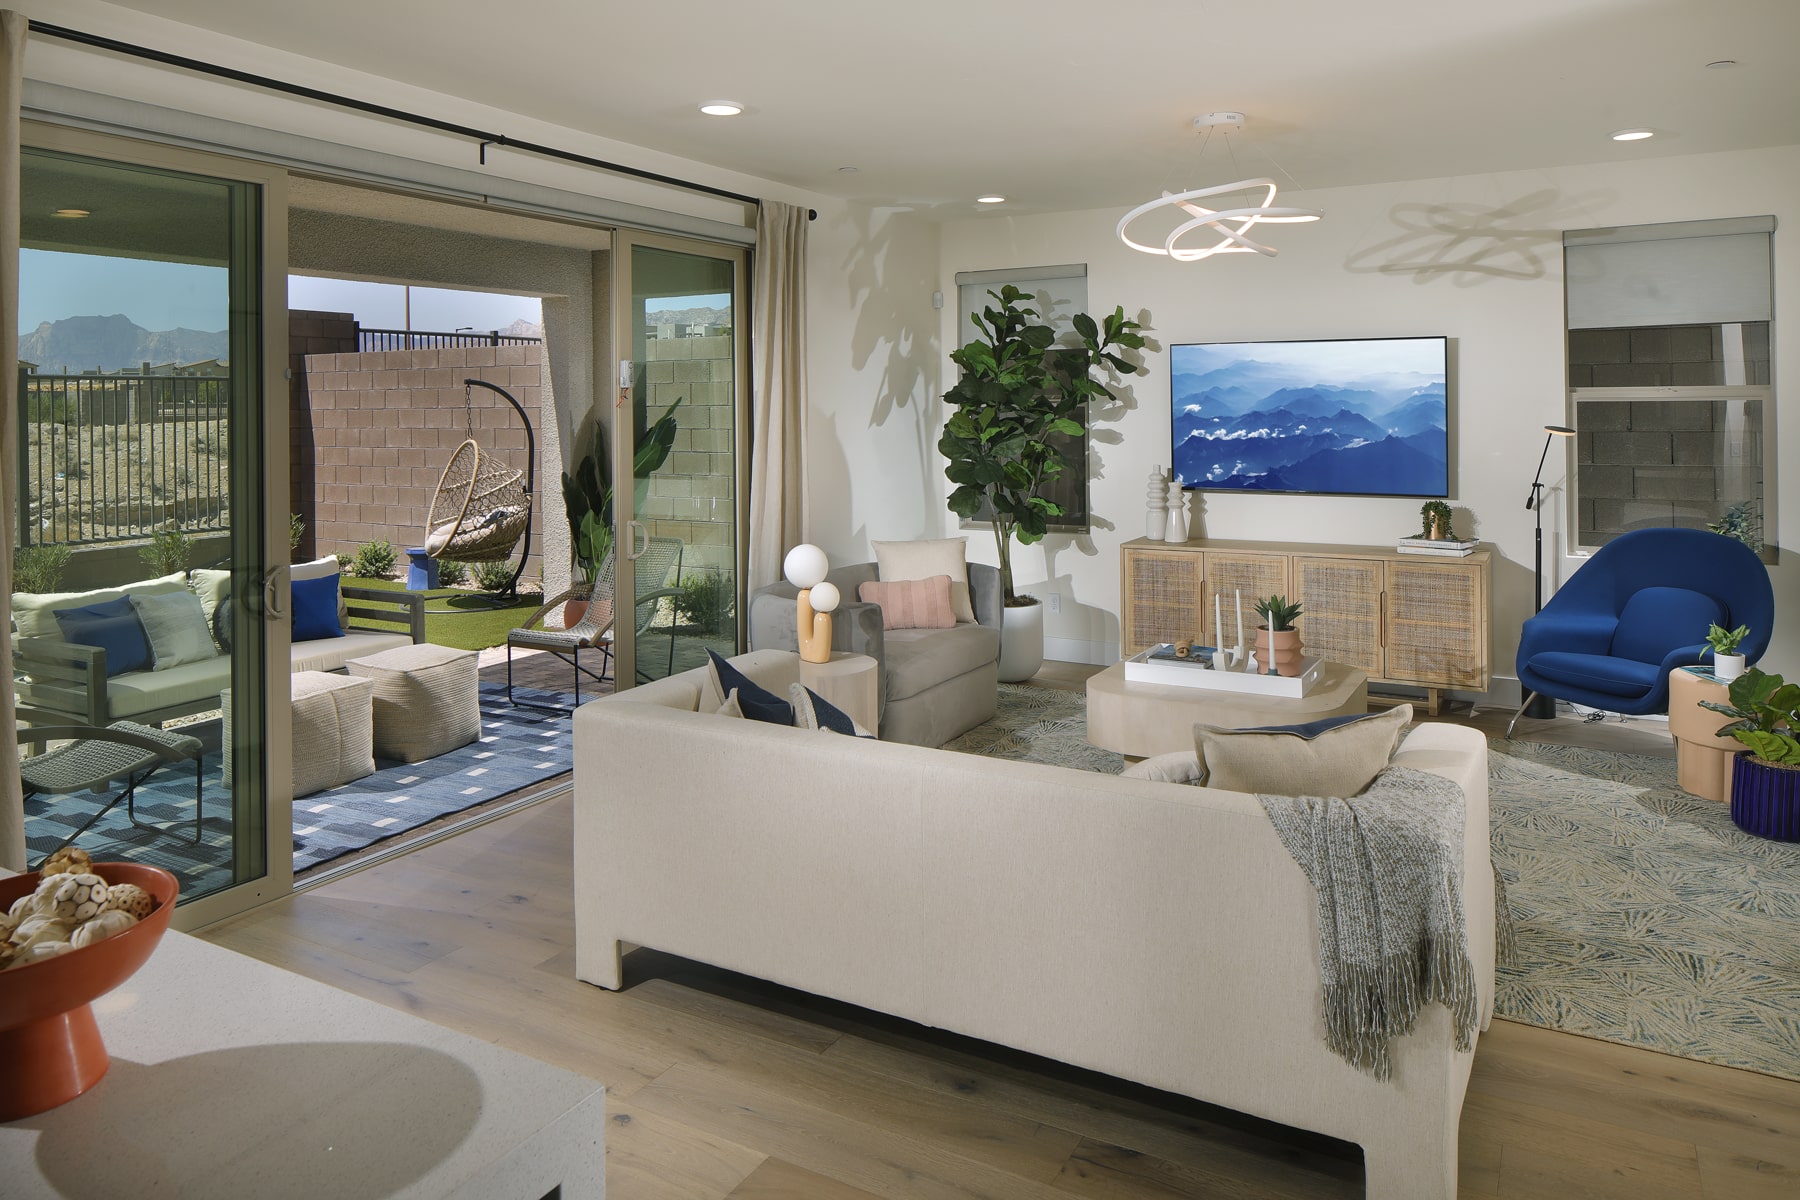 Living Room of Plan 2 at Arroyos Edge by Tri Pointe Homes